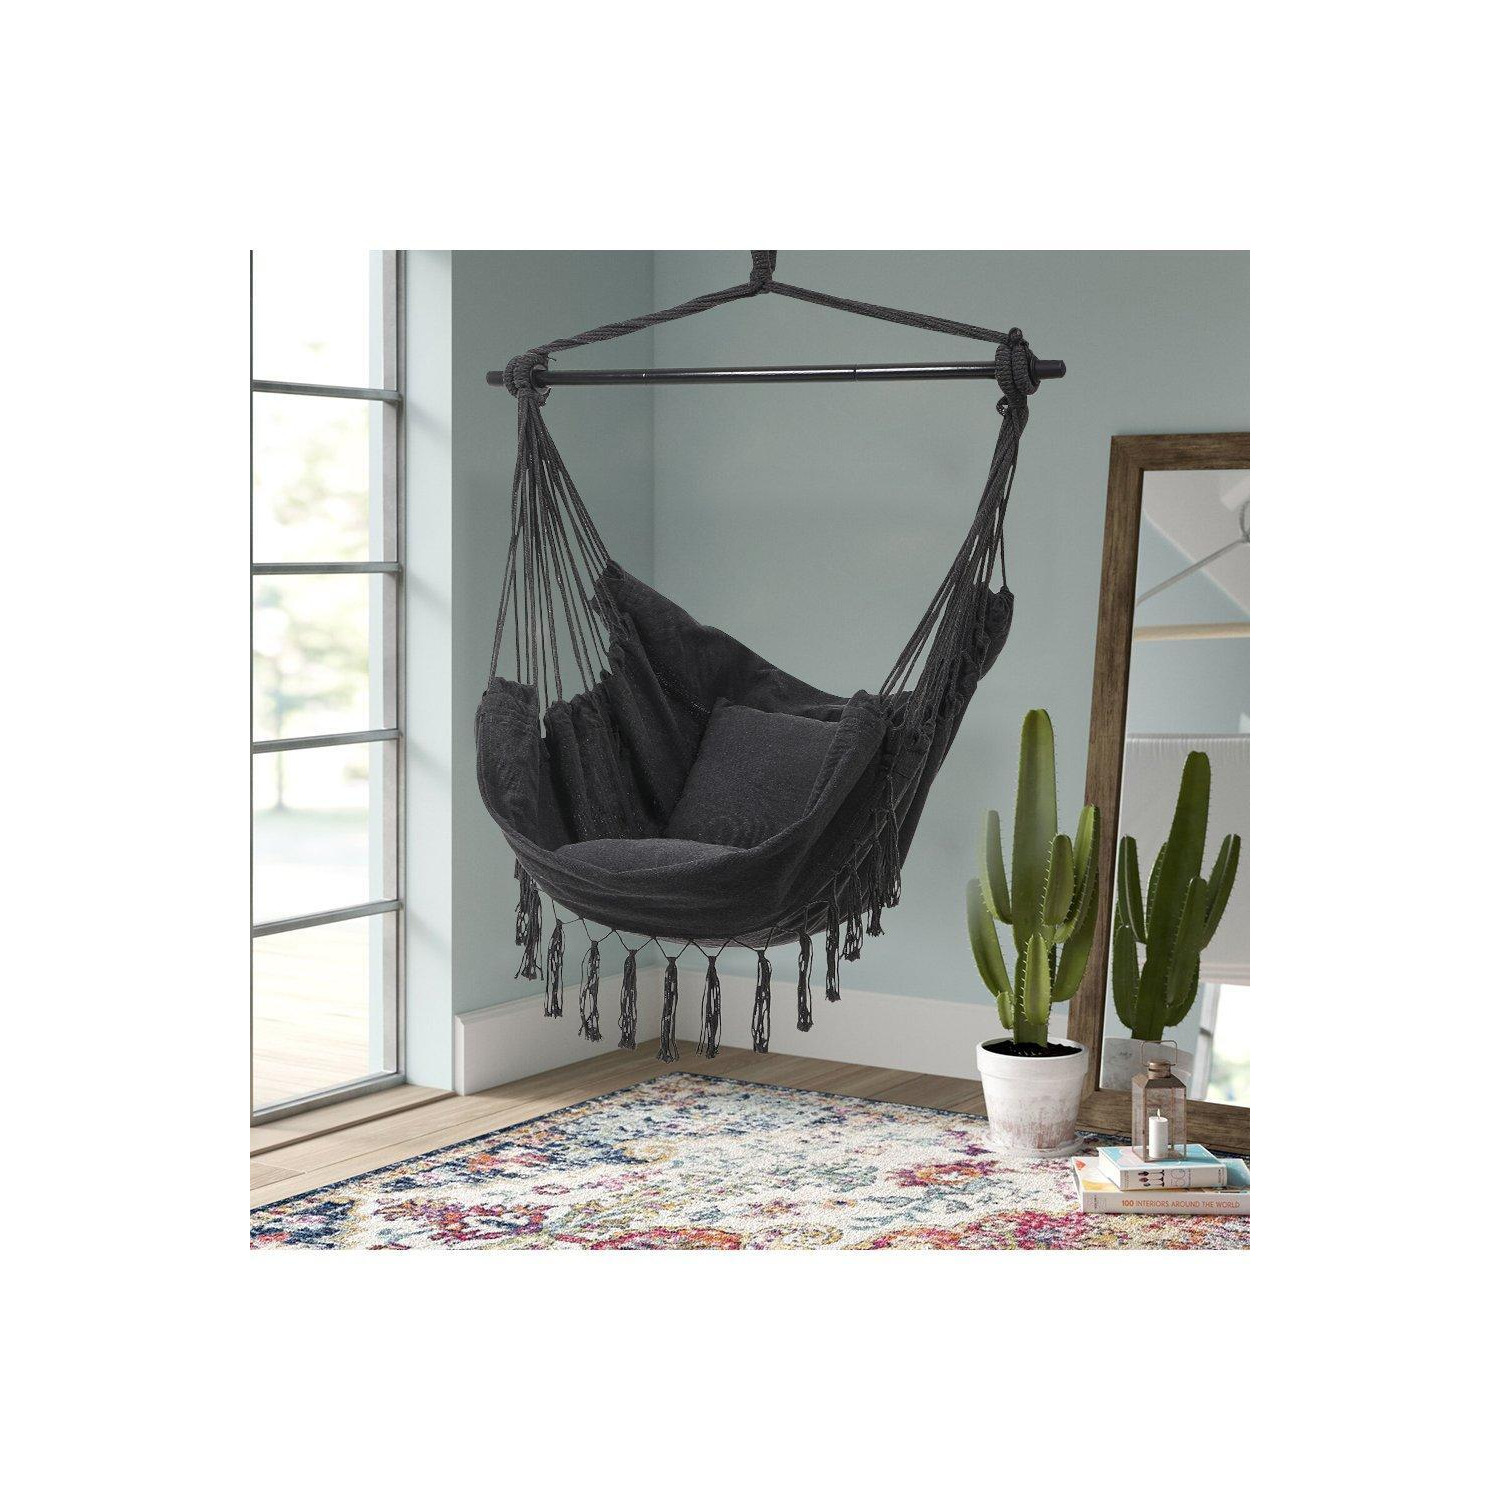 Foldable Hanging Chair Outdoor Swing - image 1